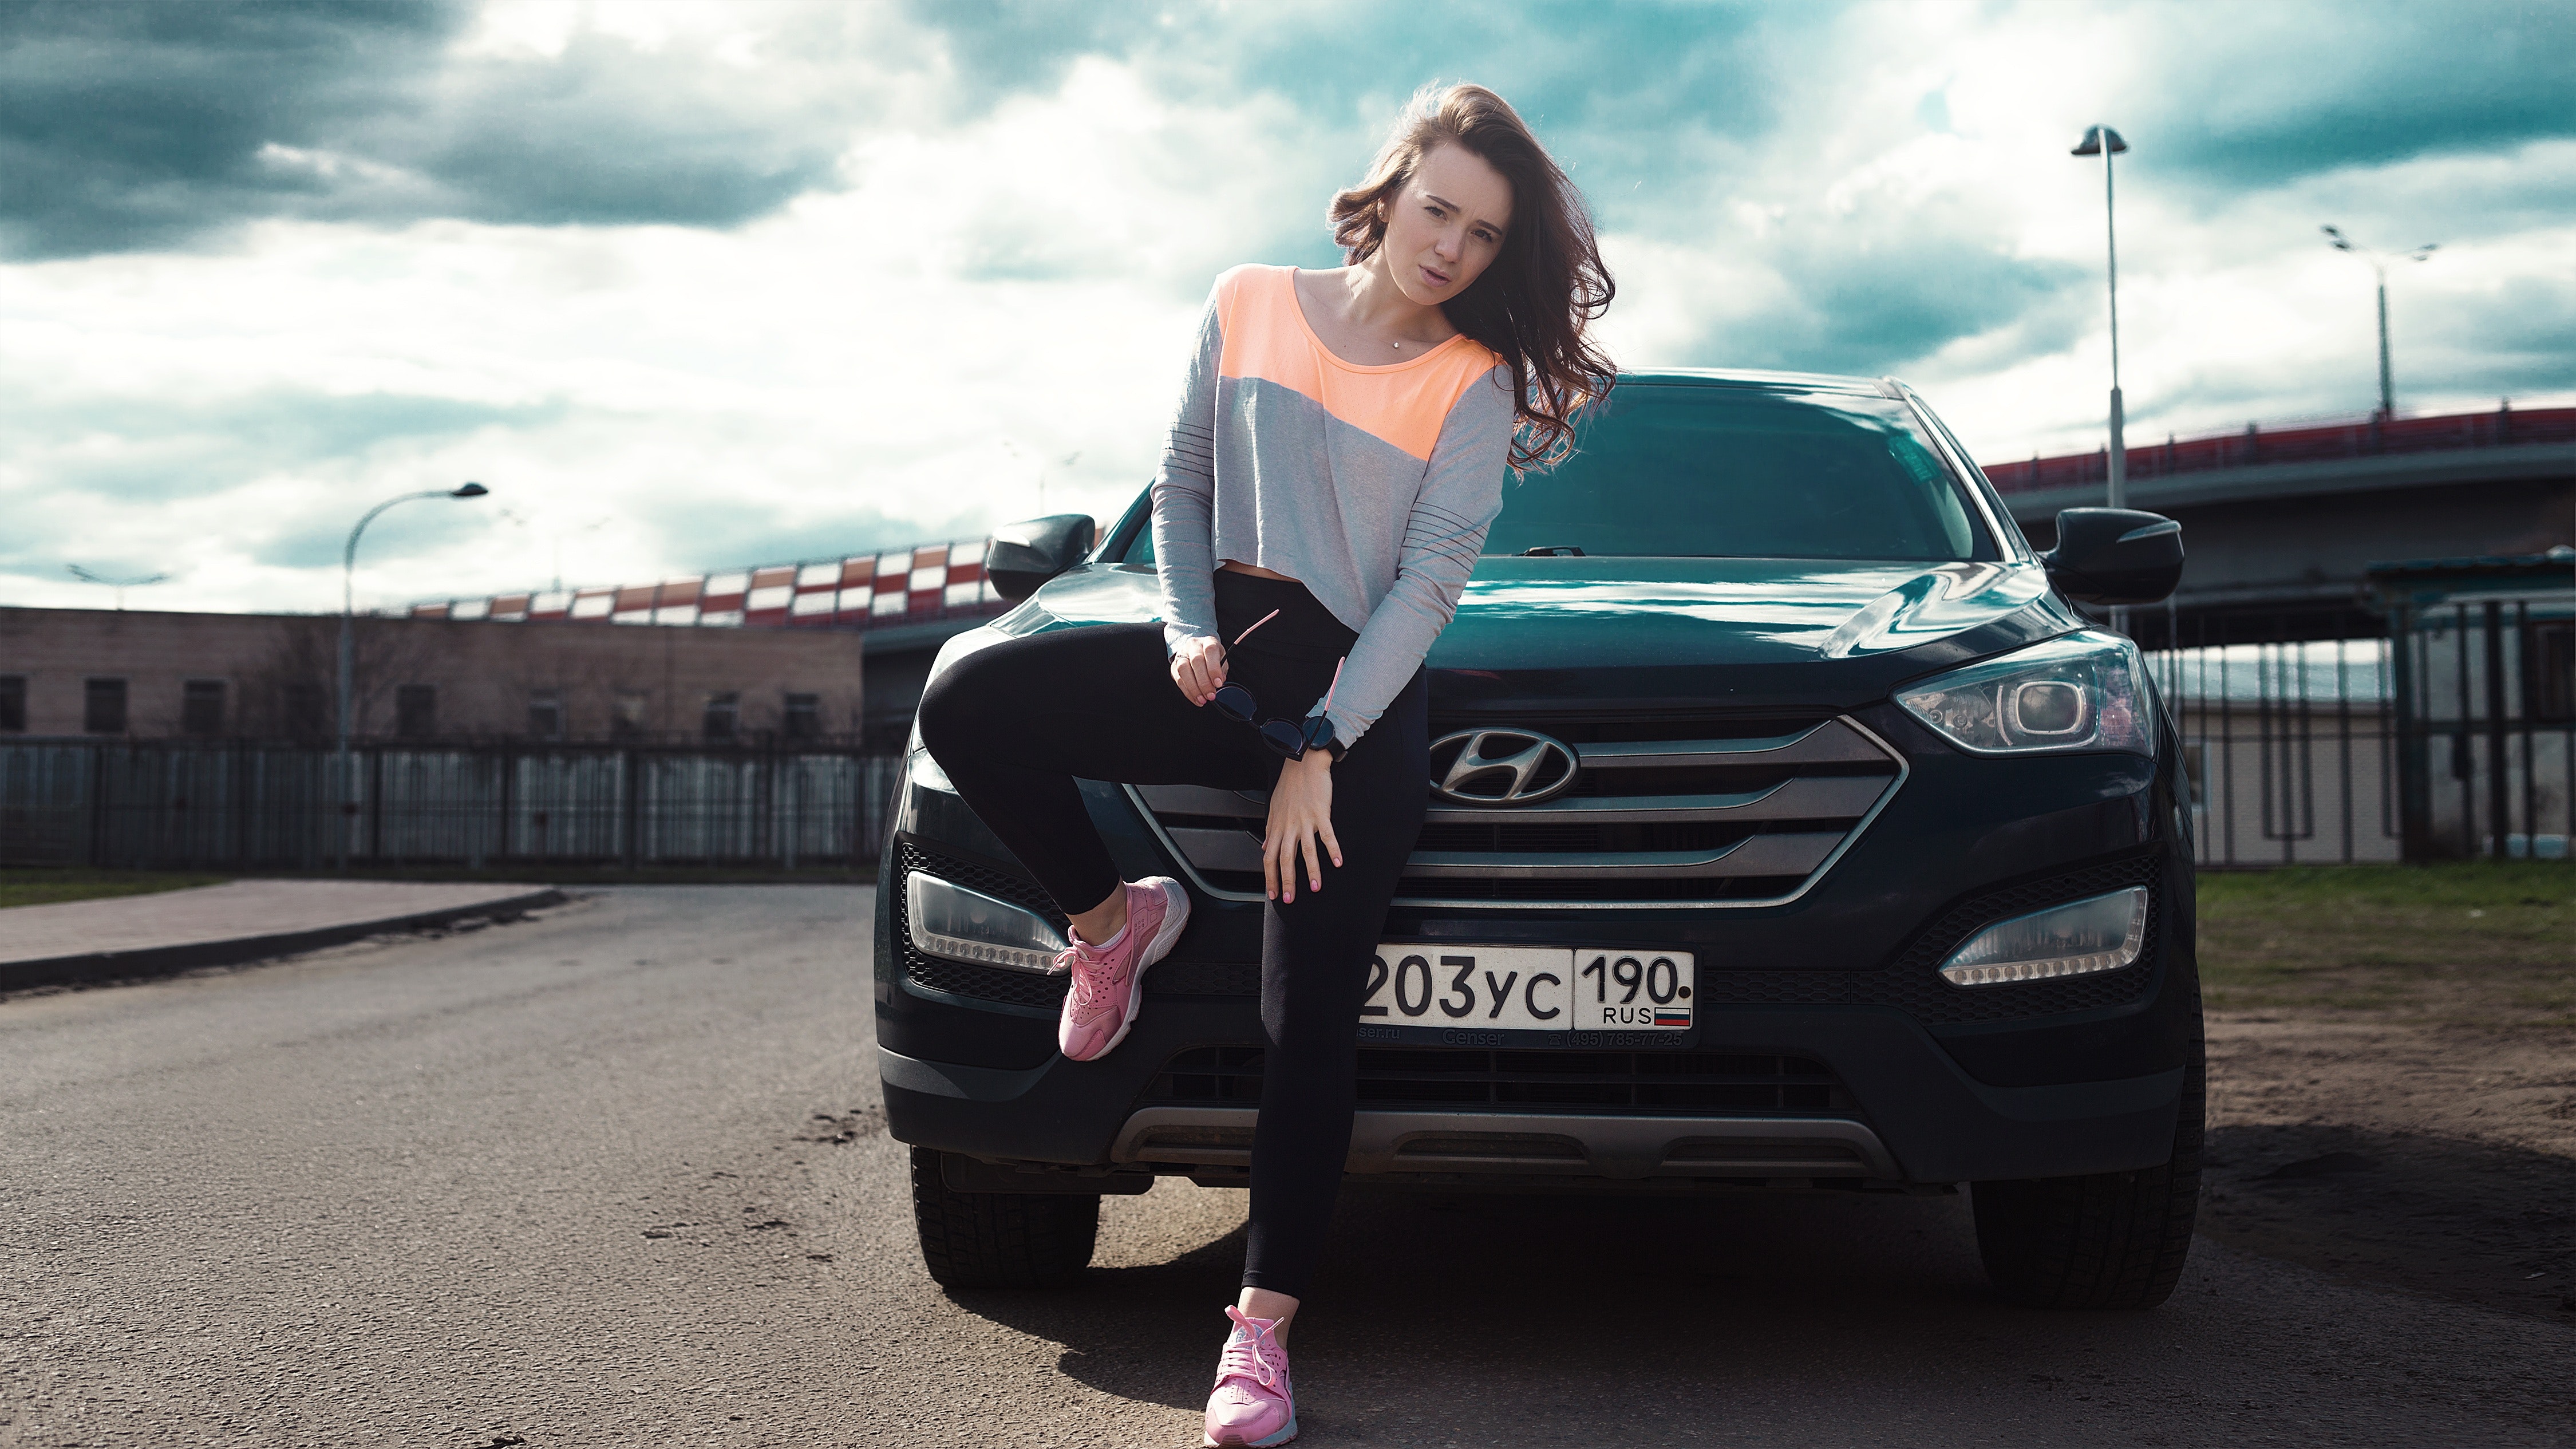 Woman Wearing Pink and Gray Long Sleeve Shirt, Adult, People, Vehicle, Travel, HQ Photo